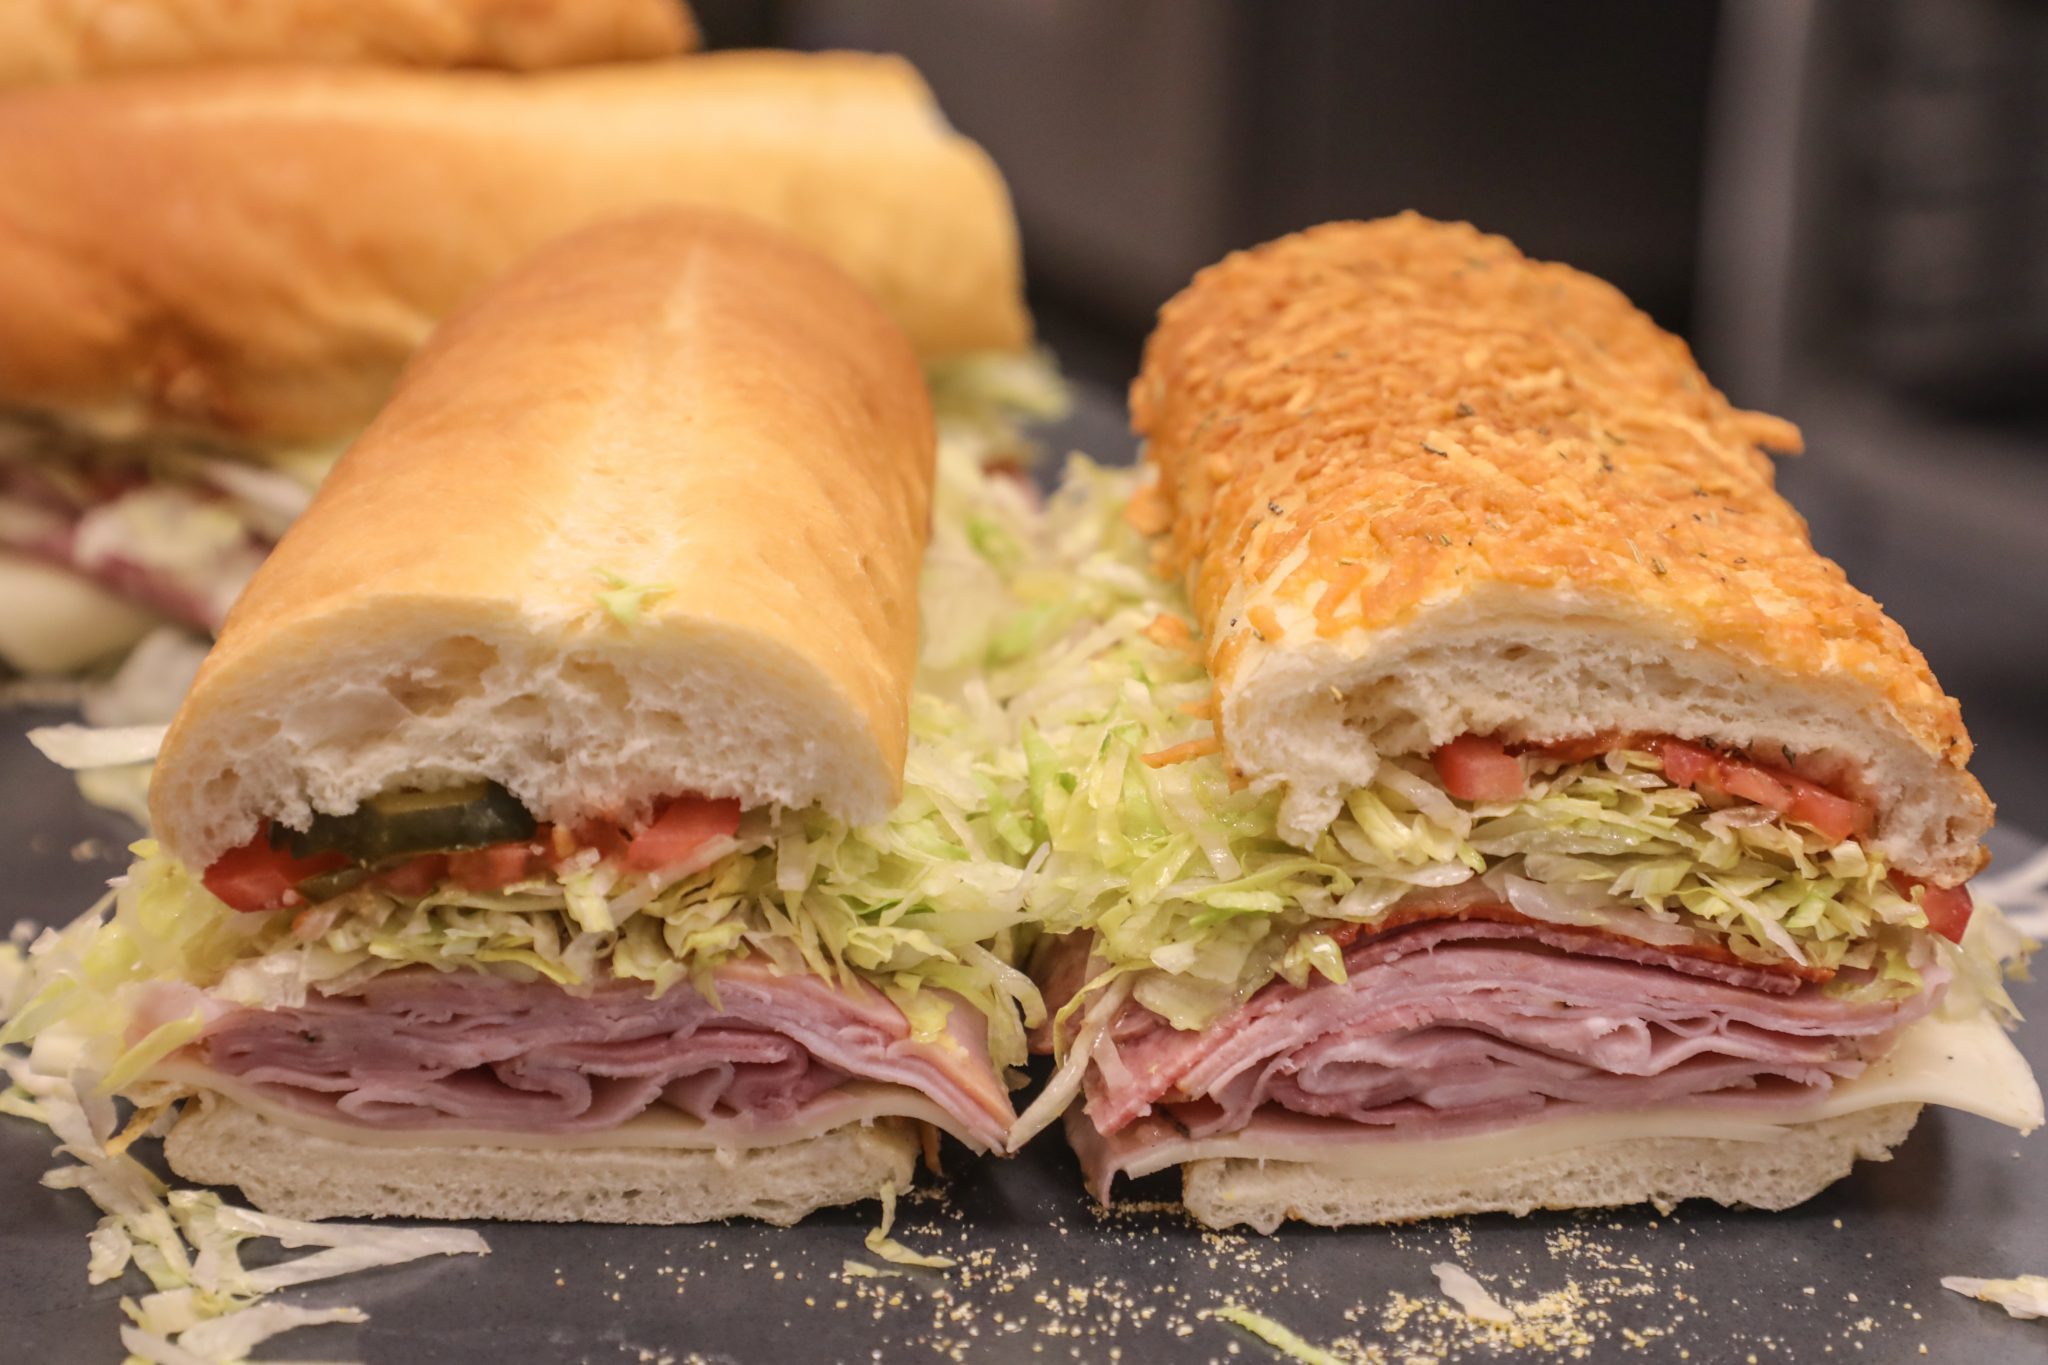 Jersey Mike’s offers wide variety of topquality hot and cold subs in a